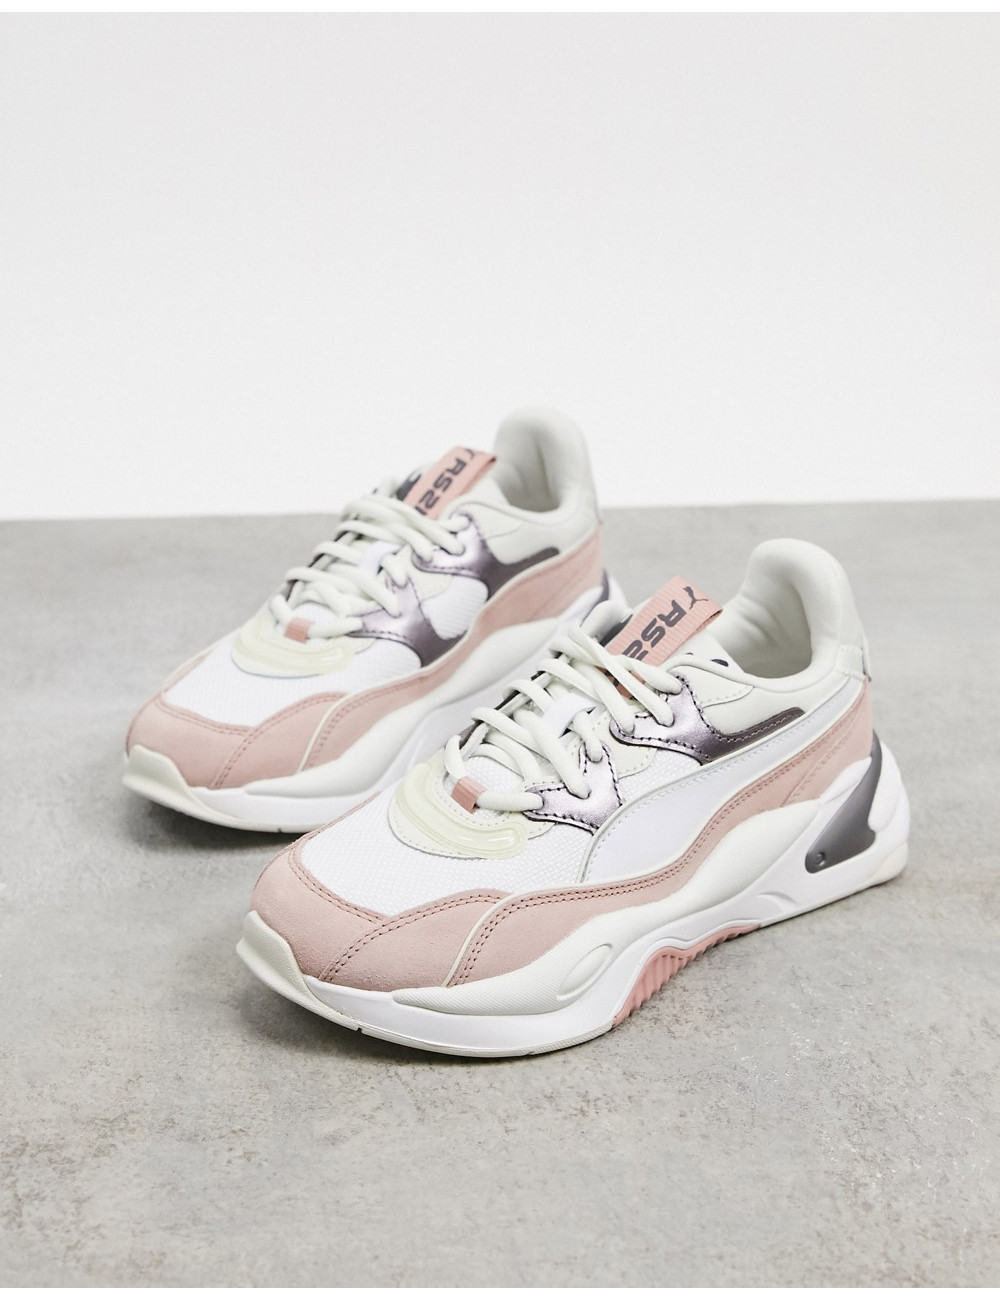 Puma RS-2K trainers in grey...